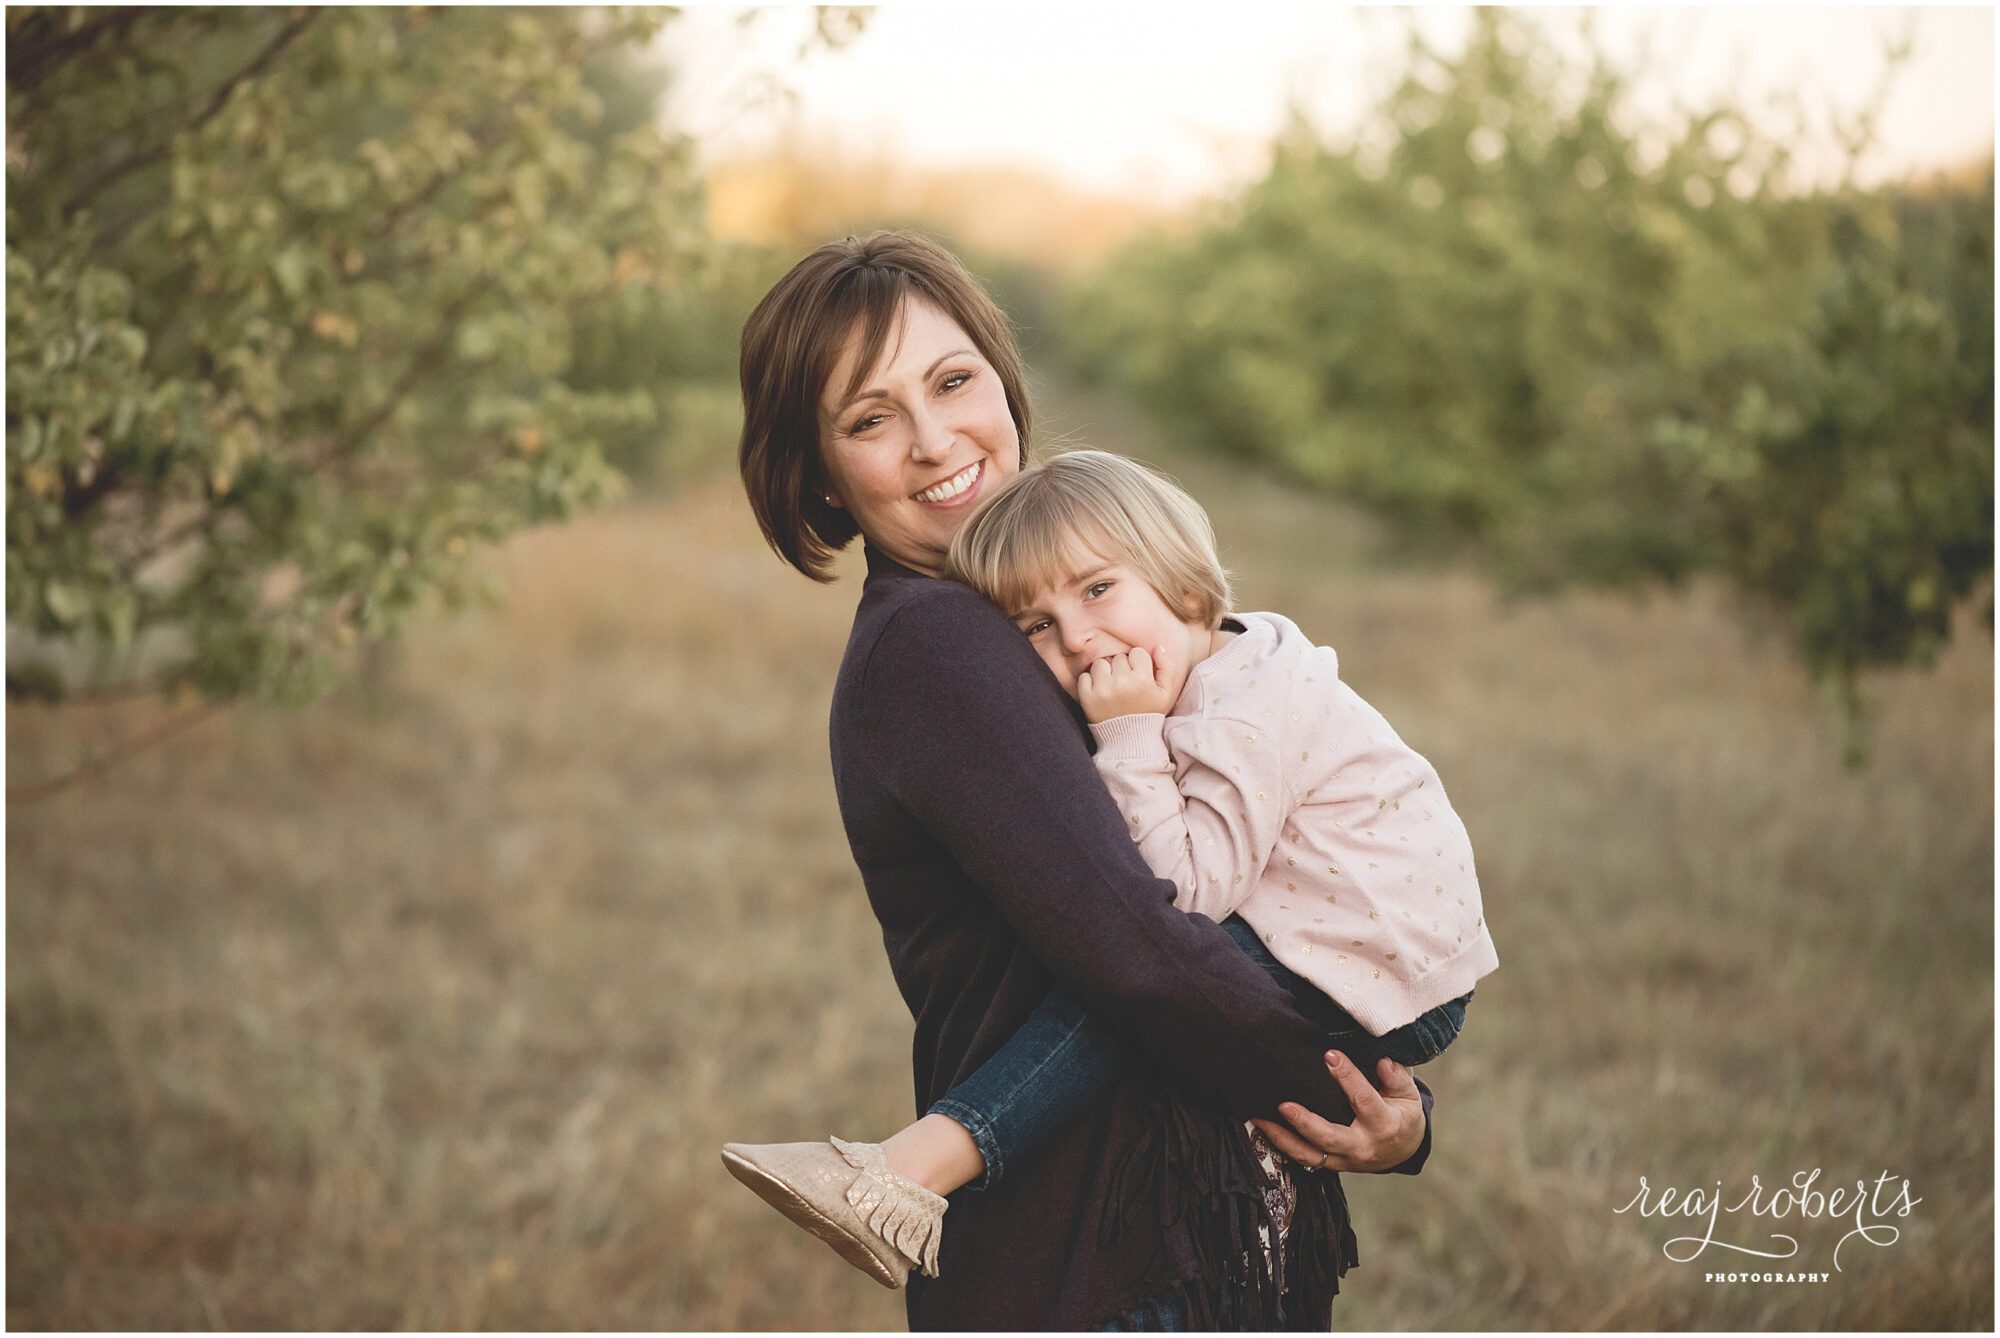 Mommy & daughter pose, family photographer, Reaj Roberts Photography